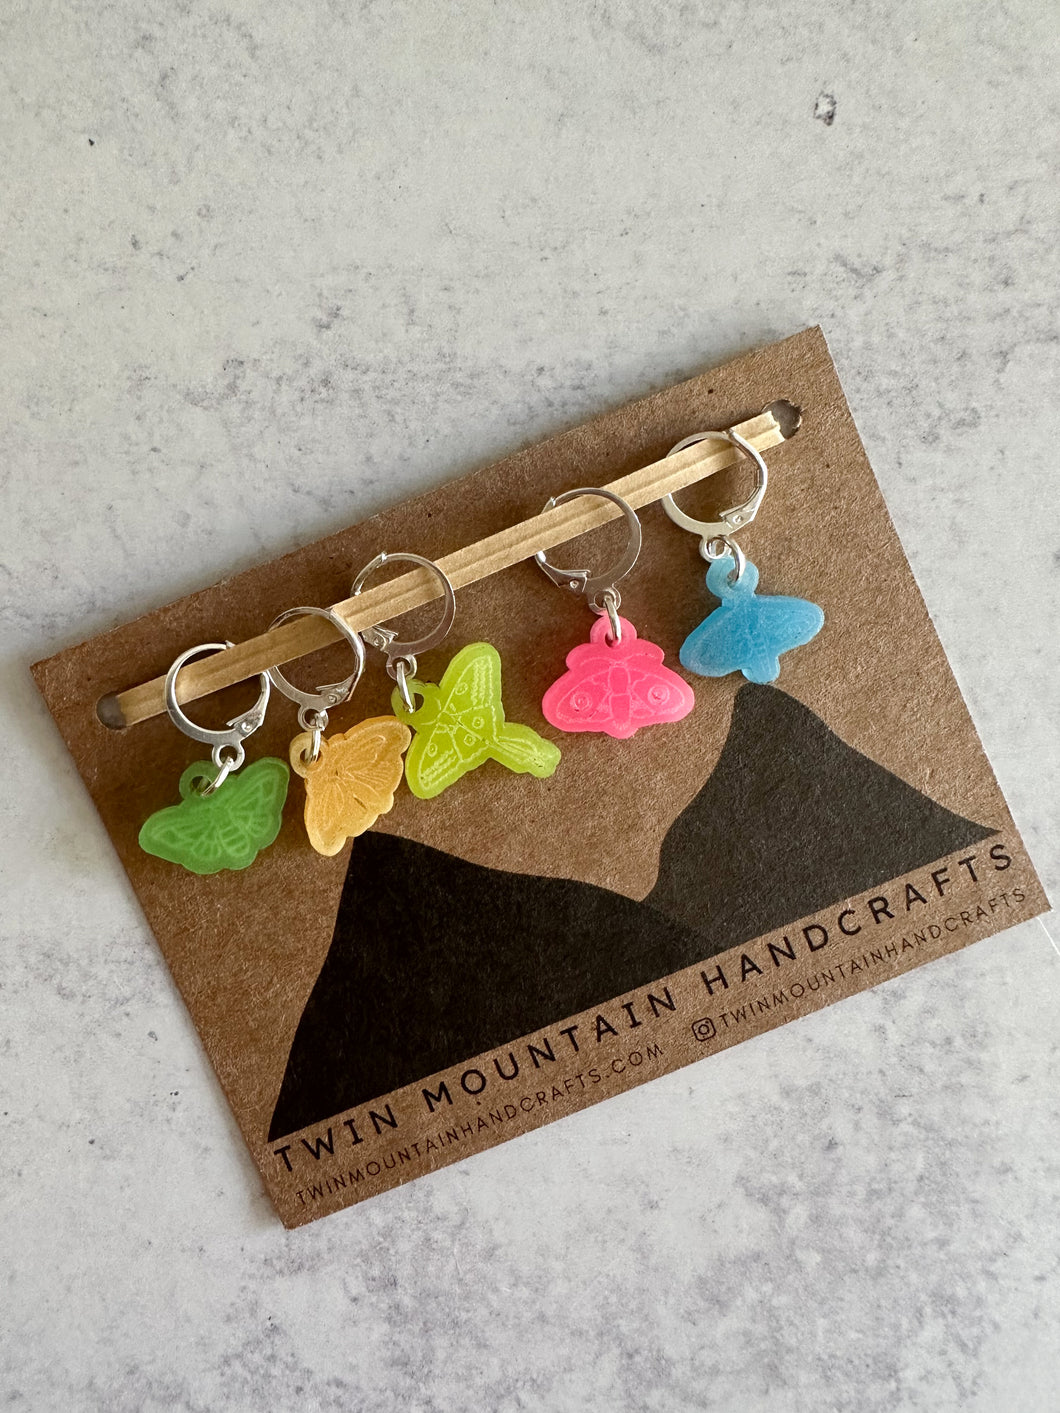 Glow in the Dark Moth Stitch Markers (Set of 5)